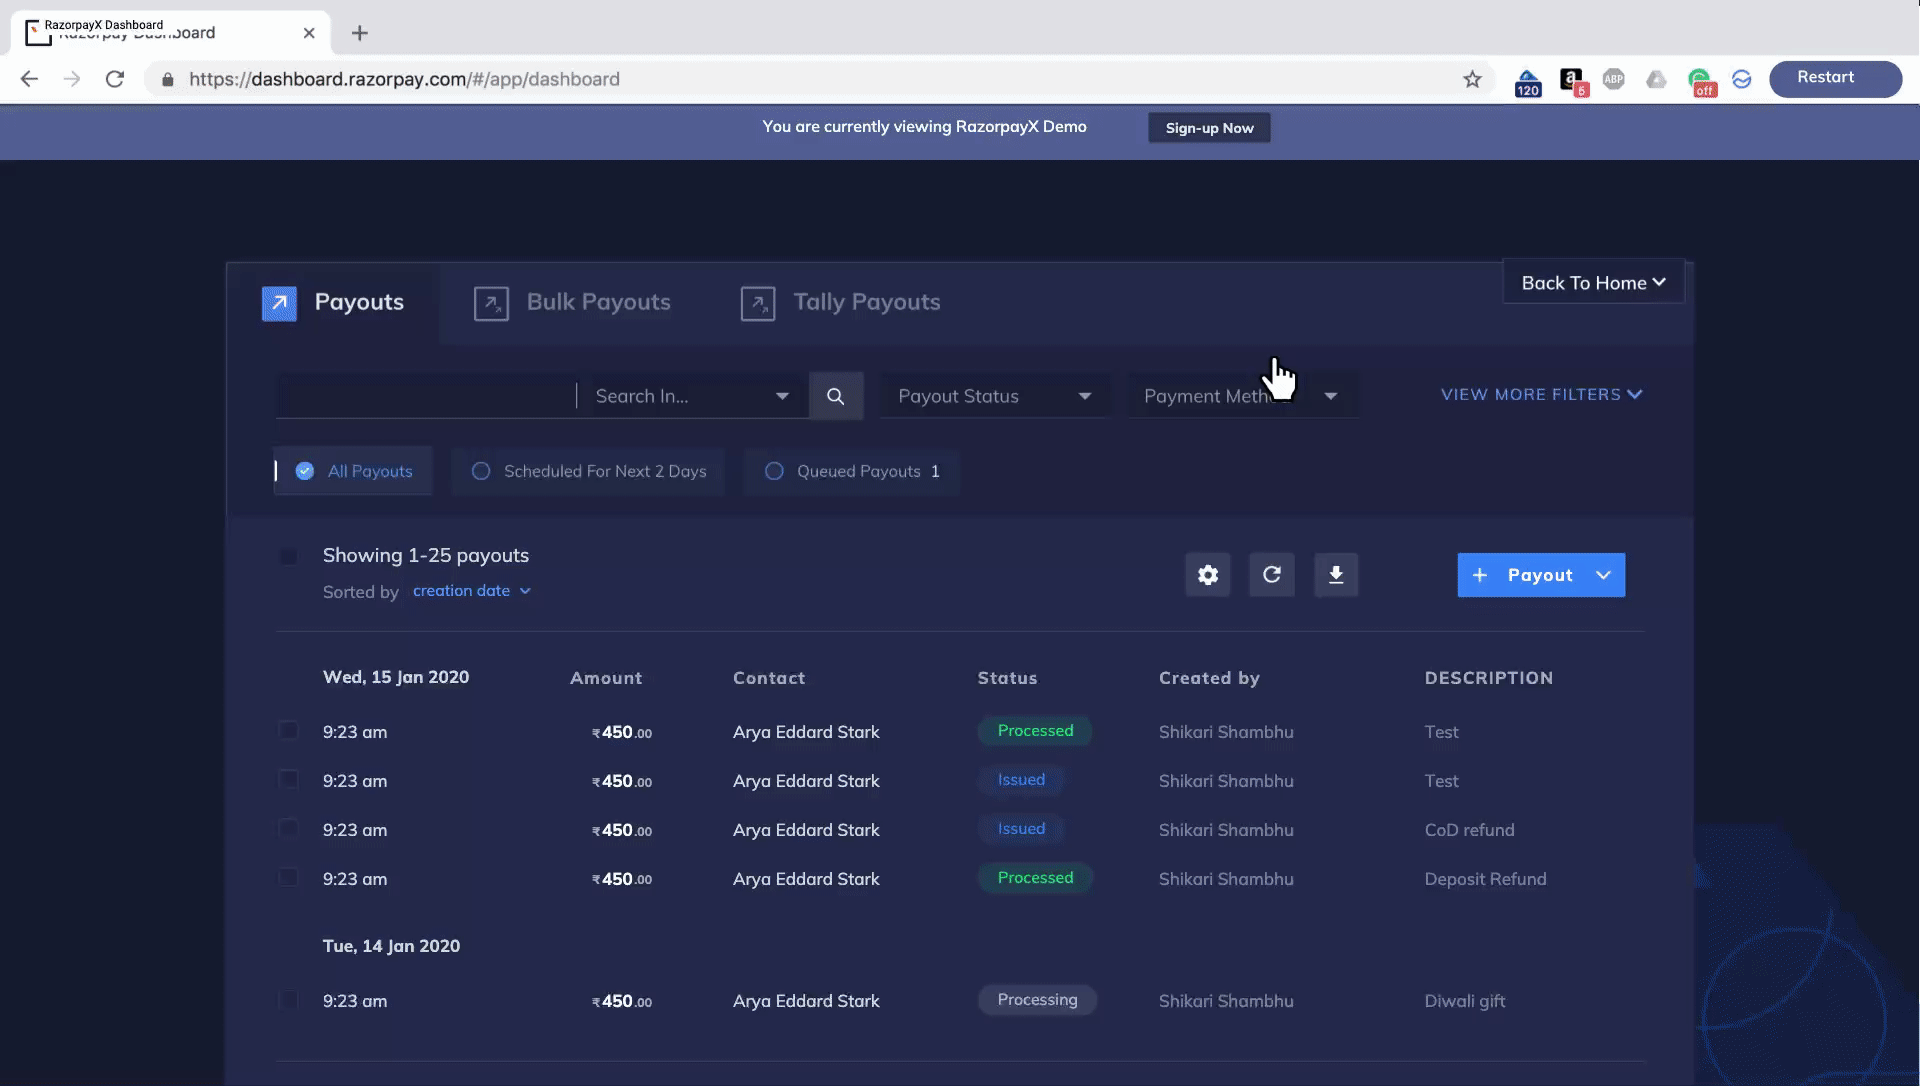 Demo of RazorpayX, showing how to make a payout in Live mode.